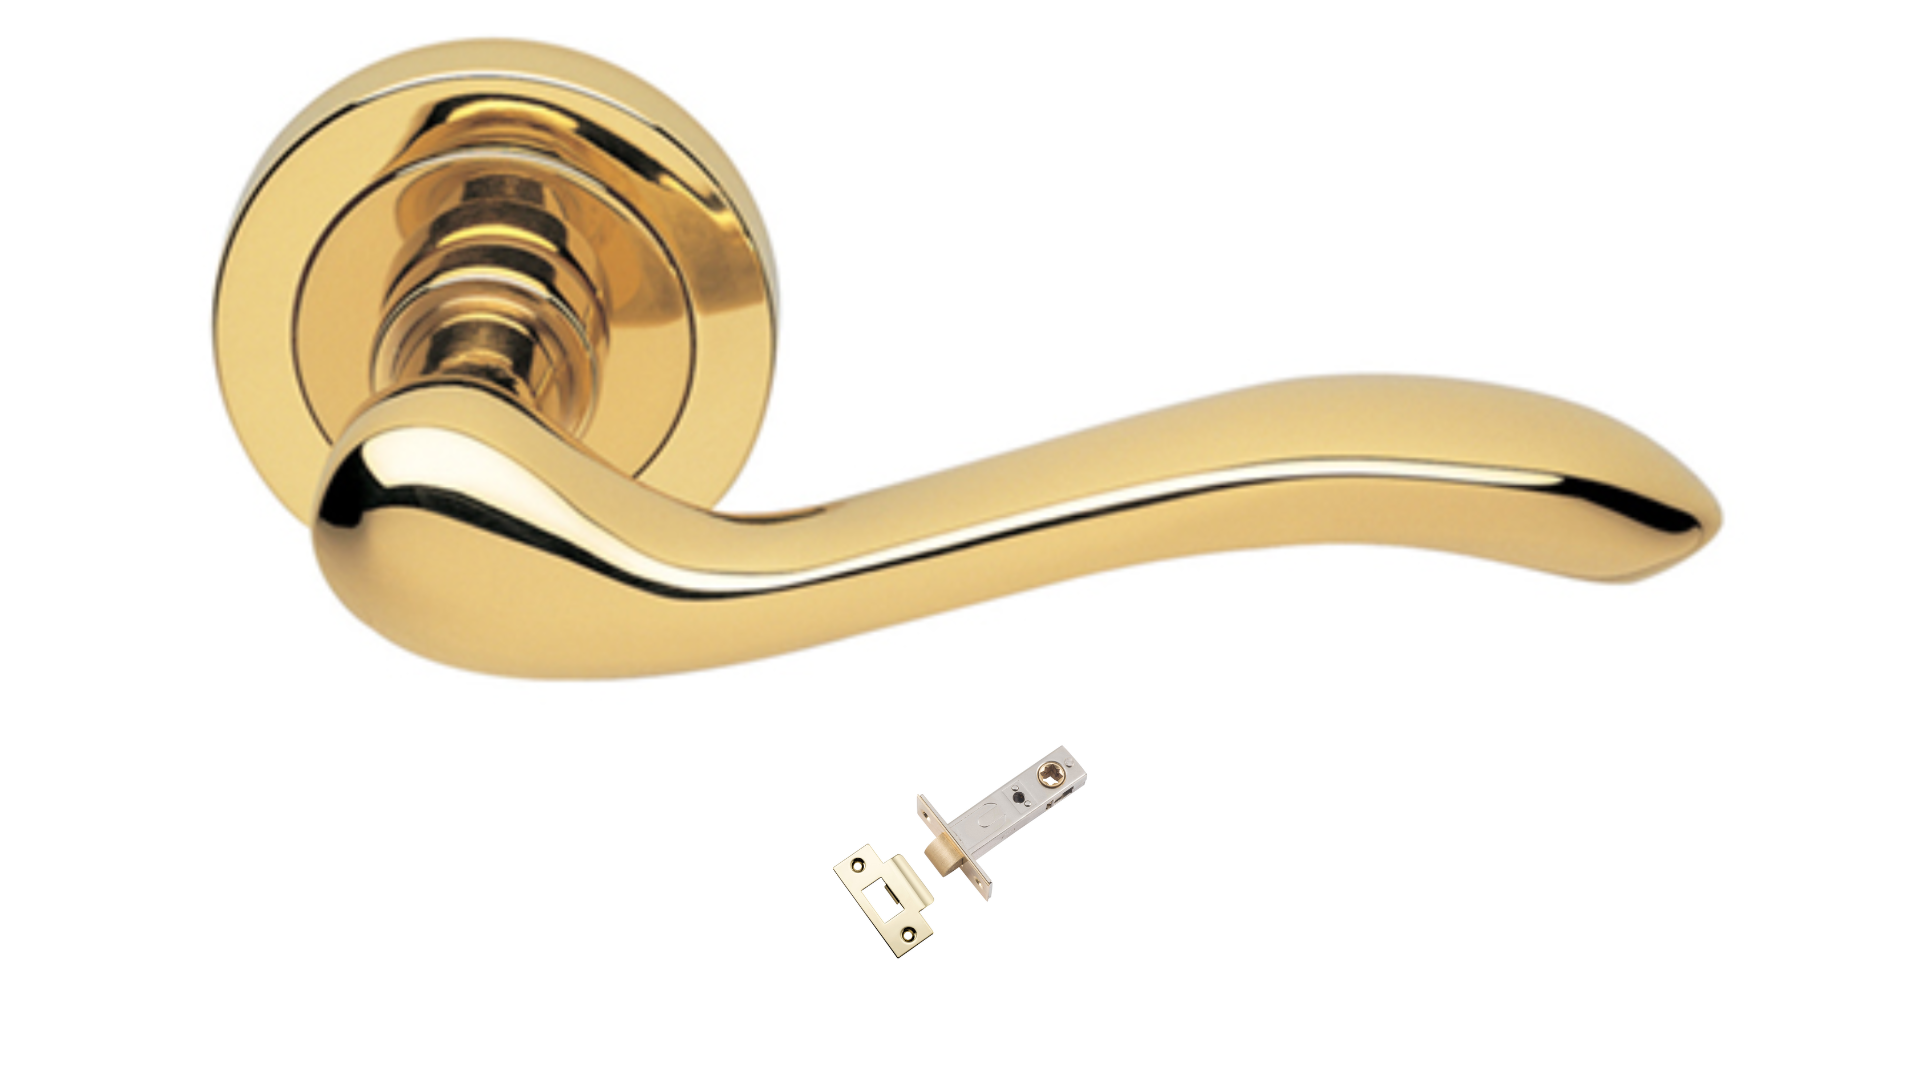 The Erica door handle in polished brass with a privacy latch underneath on a white background.